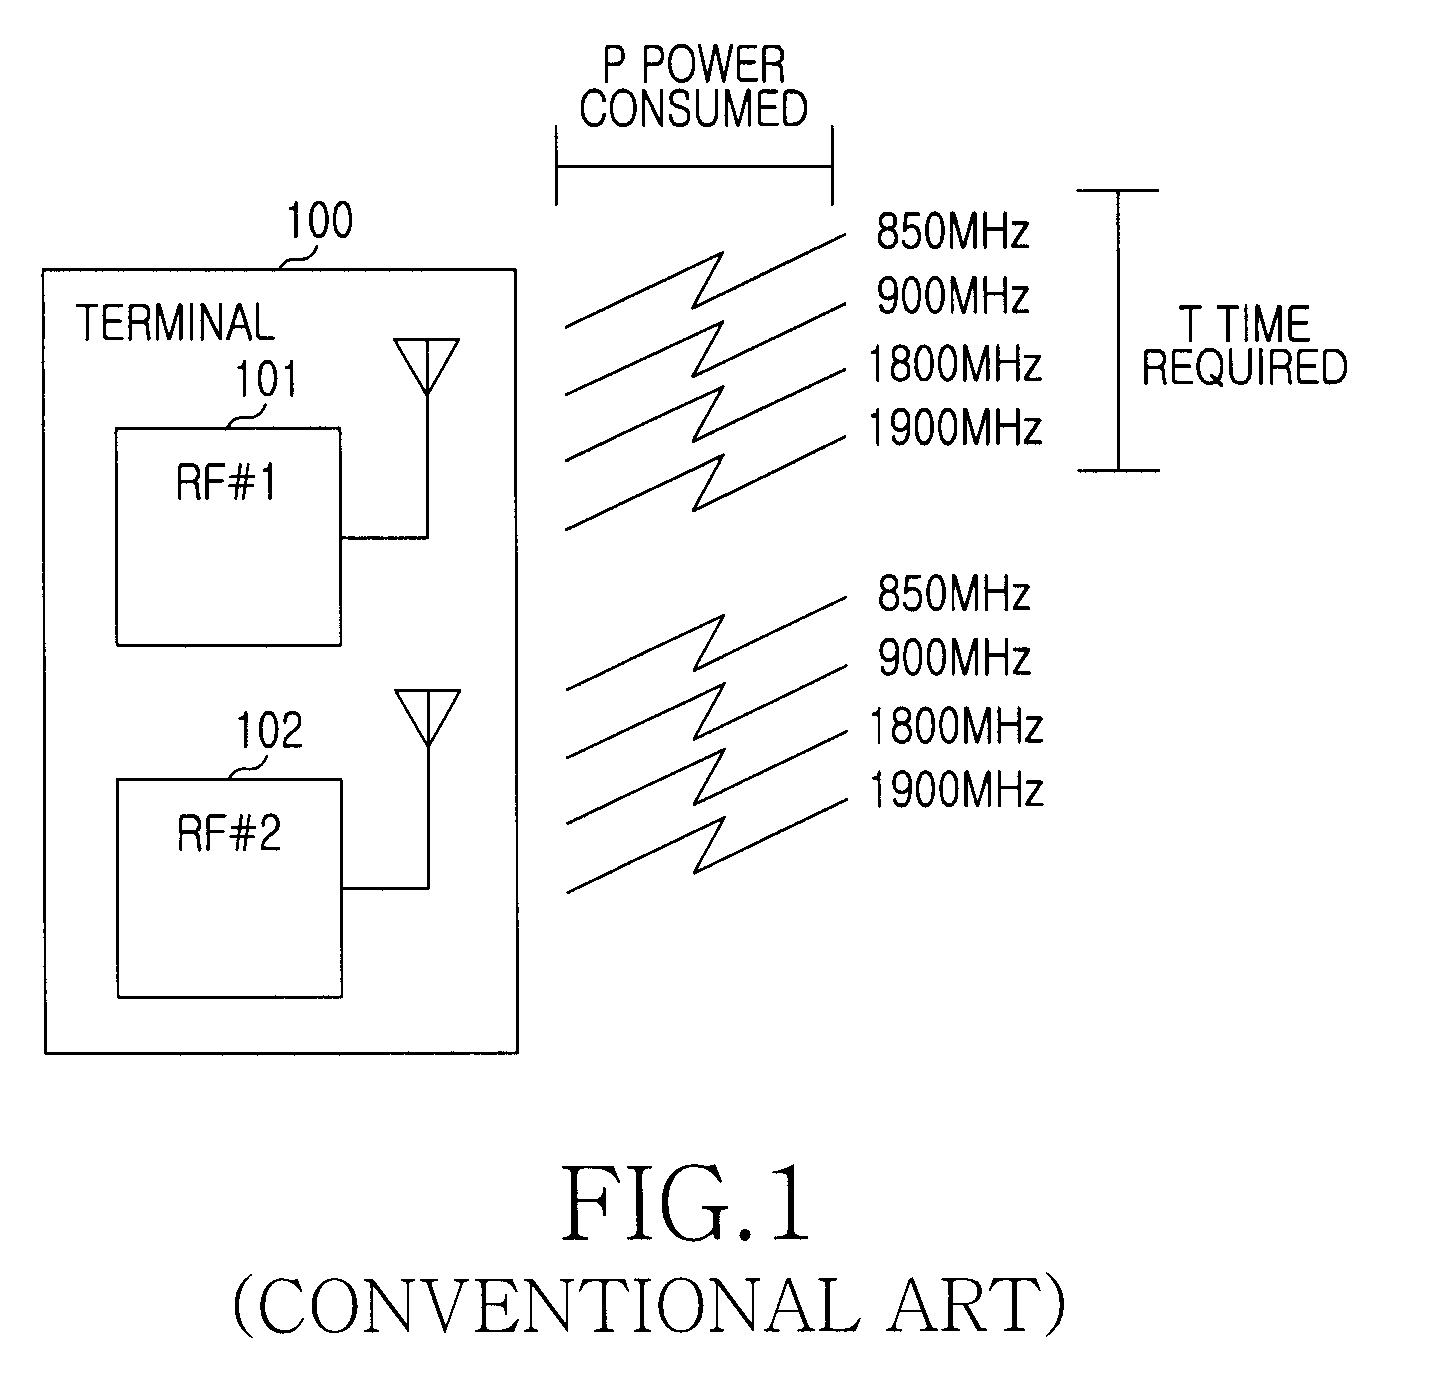 Apparatus and method for power scanning in mobile communication terminal with dual sim card